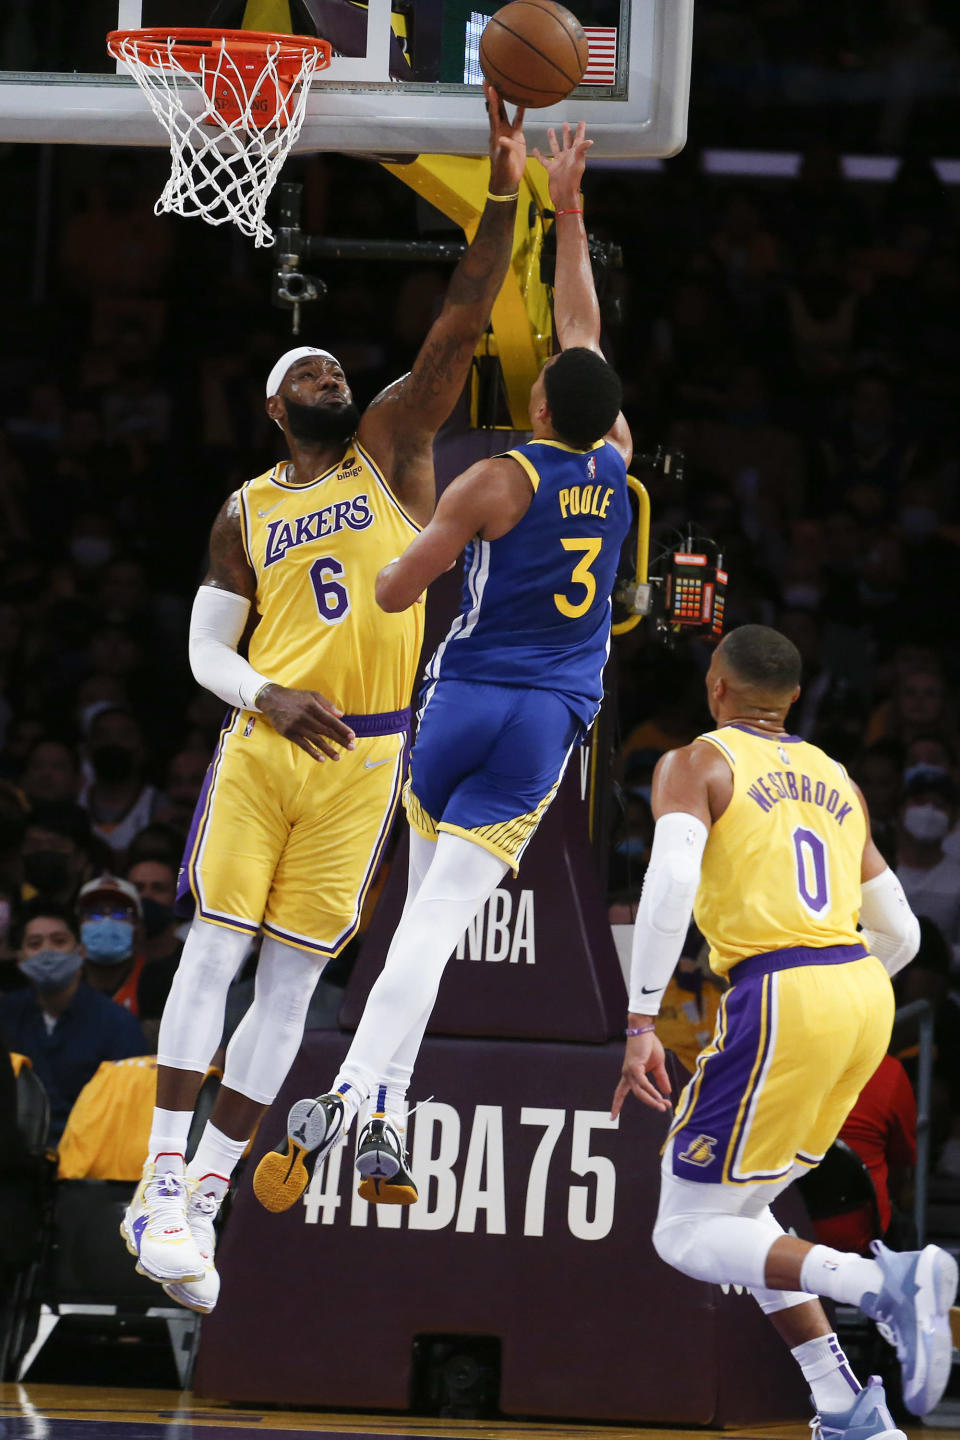 Los Angeles Lakers forward LeBron James (6) blocks a shot by Golden State Warriors guard Jordan Poole (3) during the first half of an NBA basketball game in Los Angeles, Tuesday, Oct. 19, 2021. (AP Photo/Ringo H.W. Chiu)